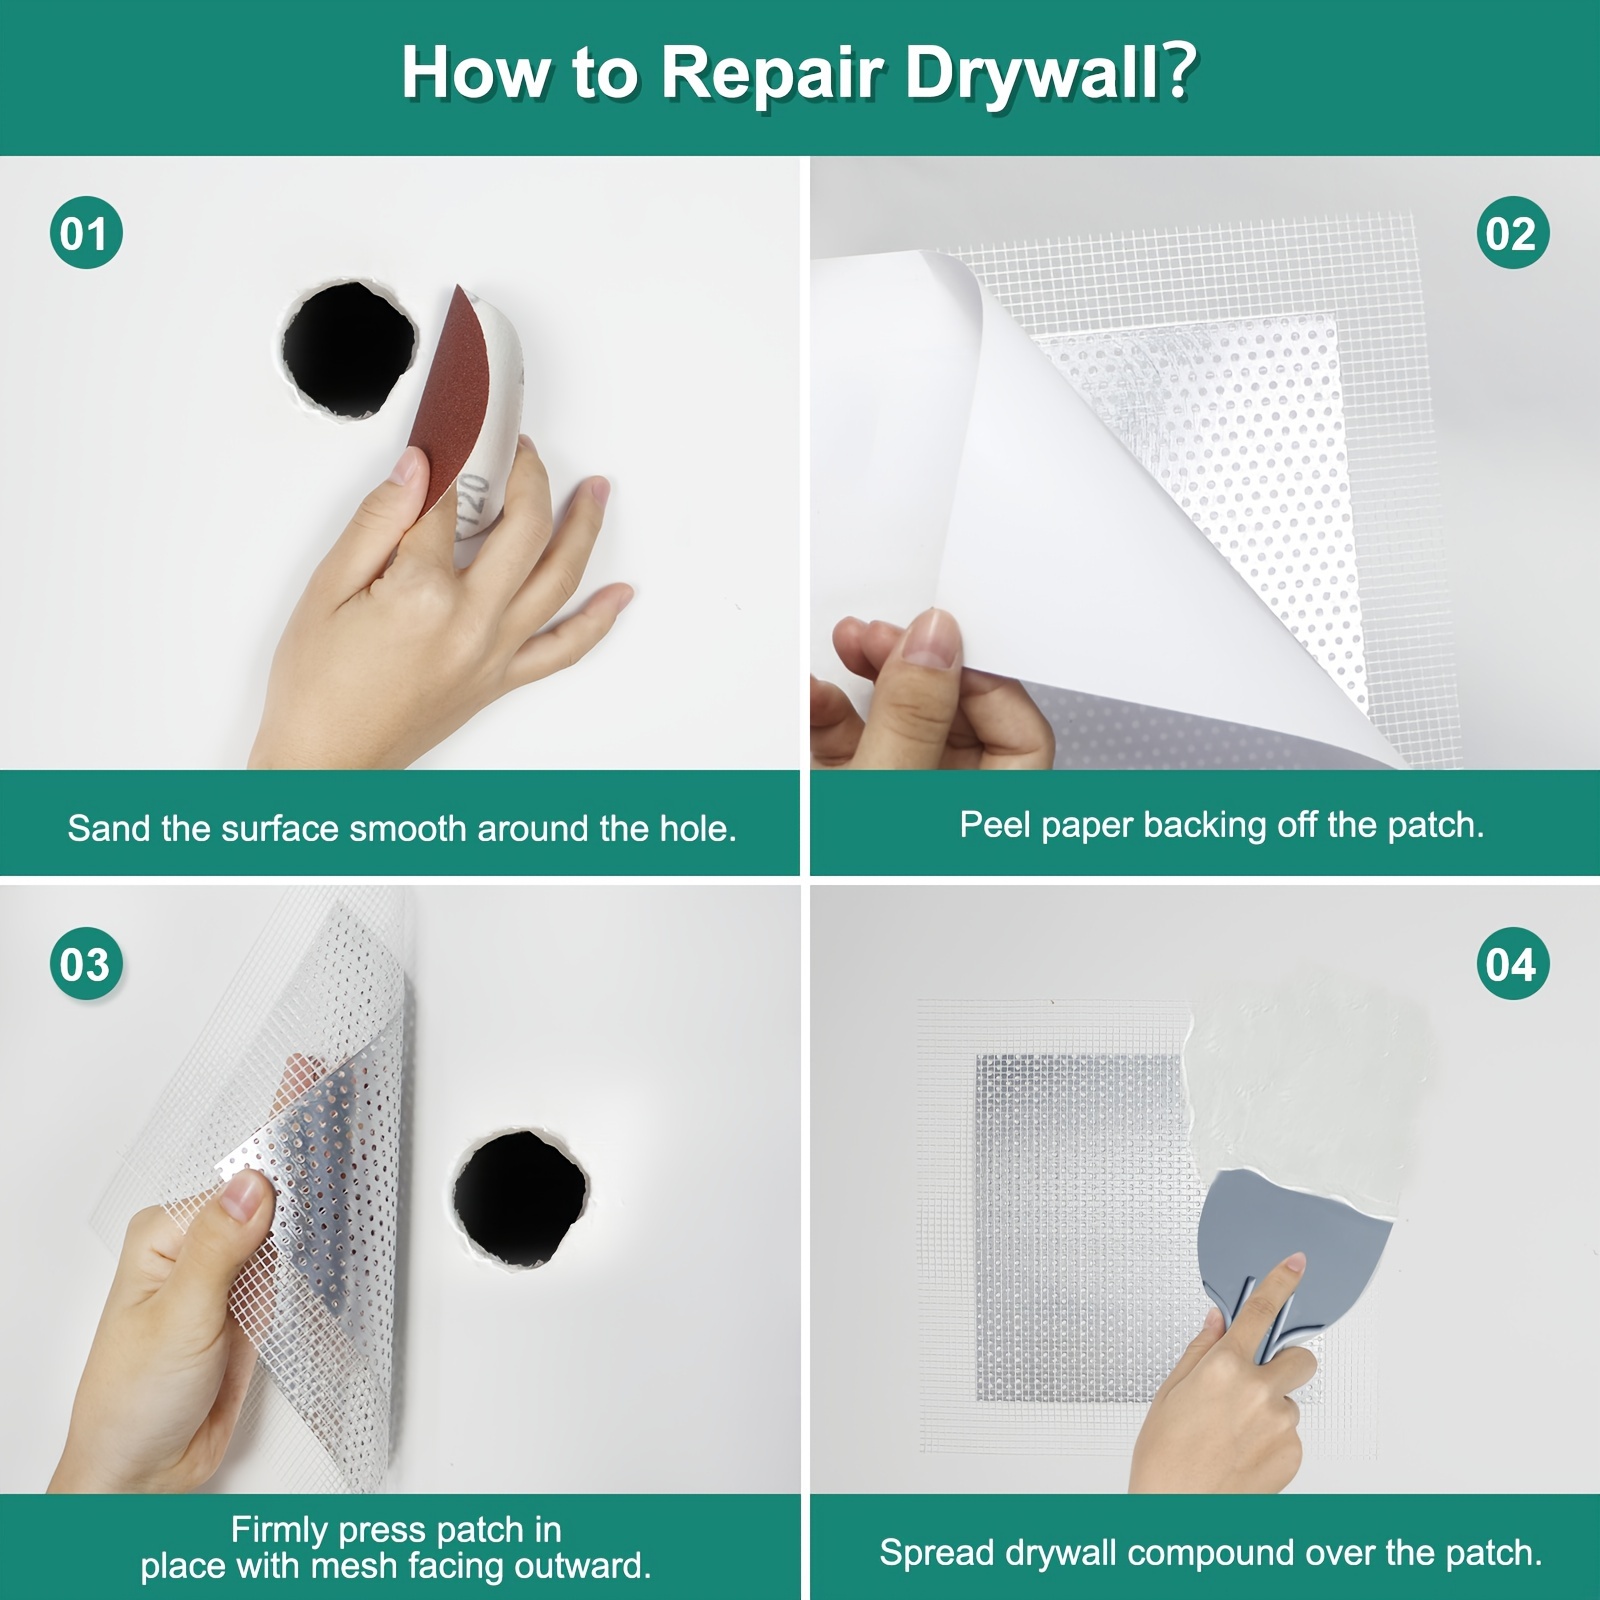 How to Repair Drywall and Patch Holes in the Wall